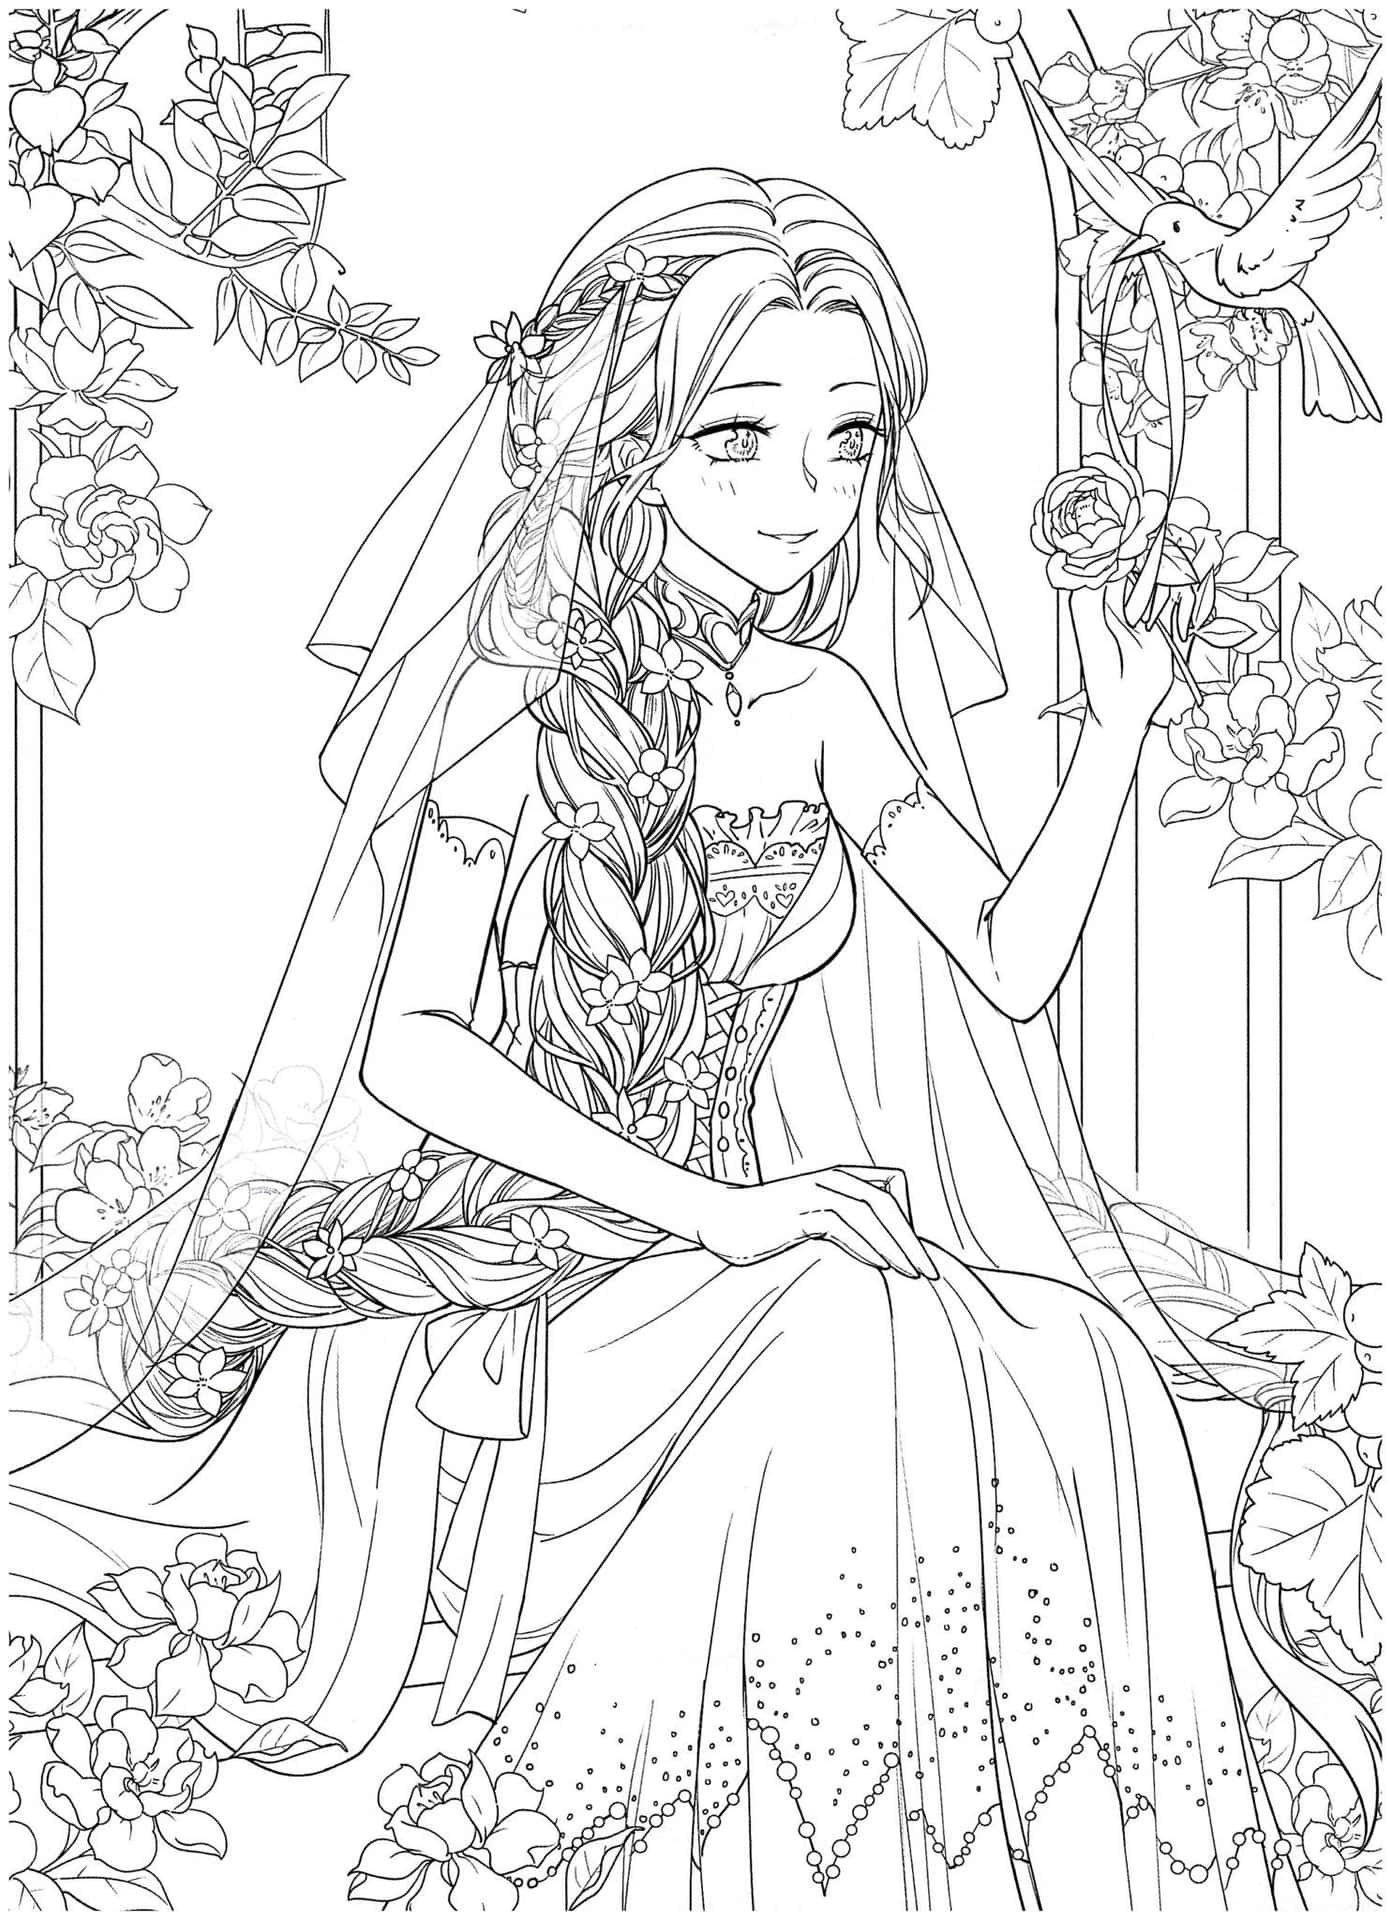 Pin on coloring pages  Manga coloring book Coloring book art Coloring  books